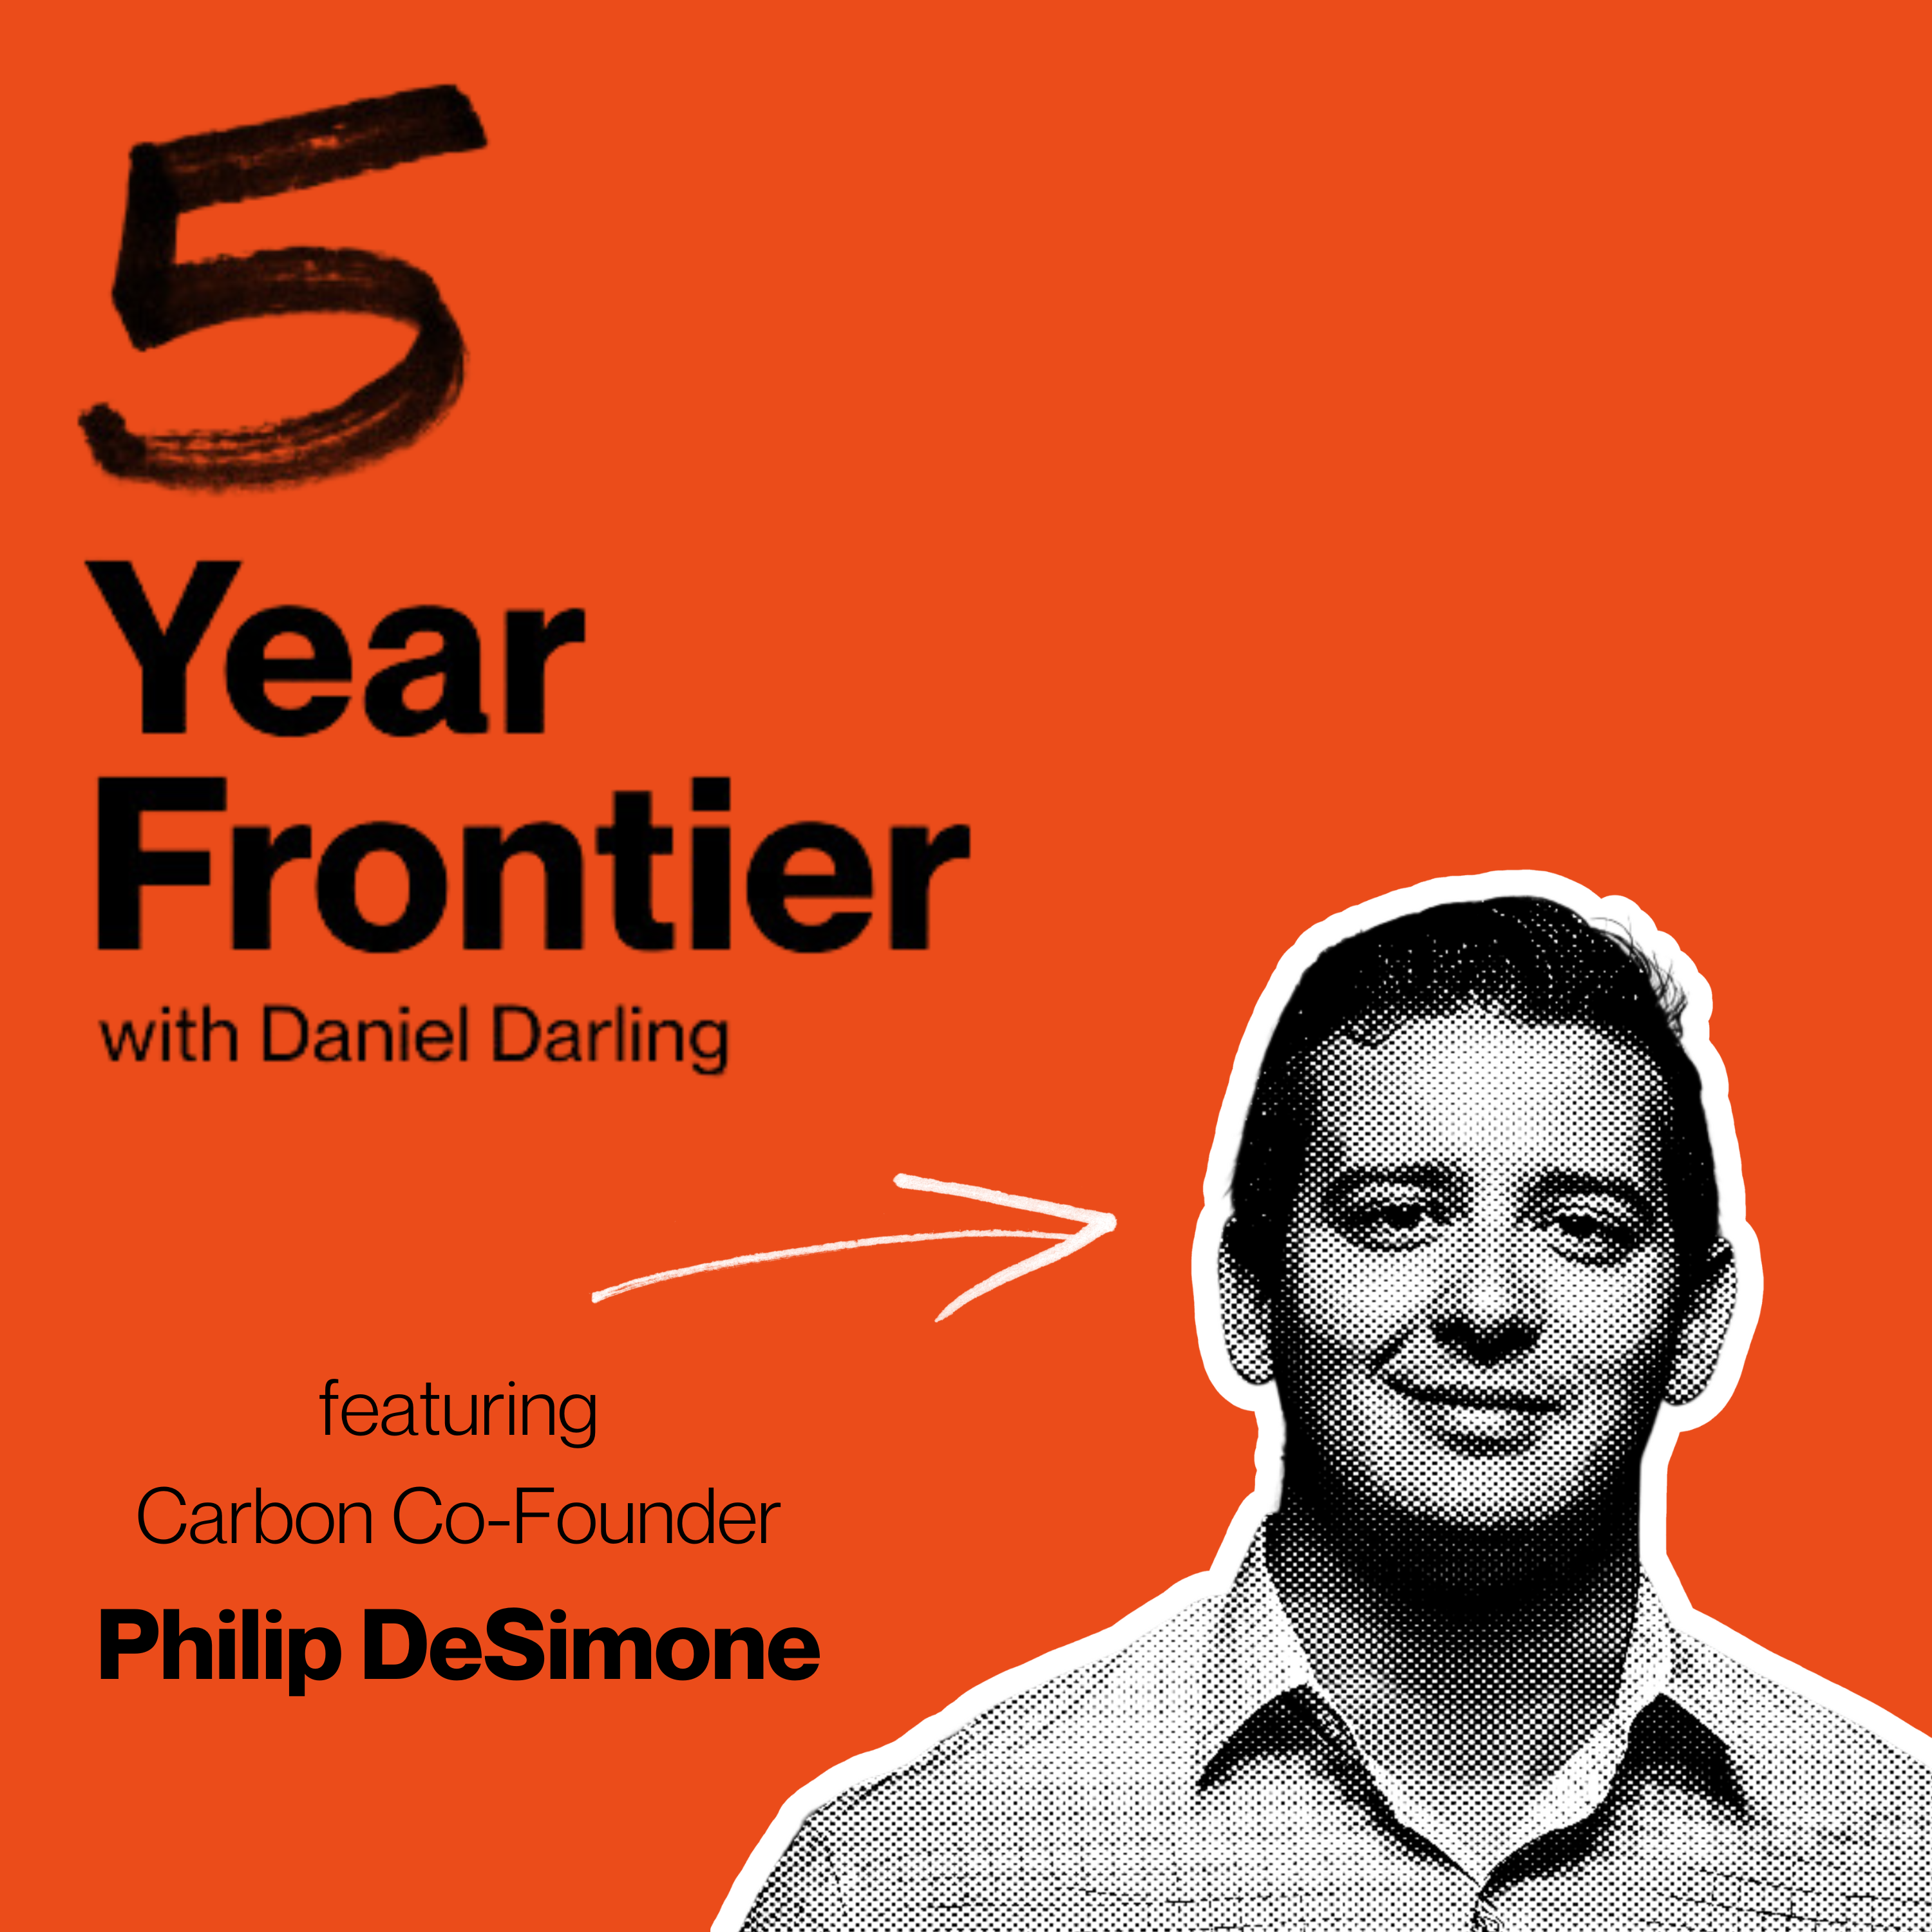 #14: 3D printing breakthroughs, AI designed products, mass customization, spare body parts, dismantling global trade, IP piracy, and the future of production w/ Carbon Co-founder Philip DeSimone